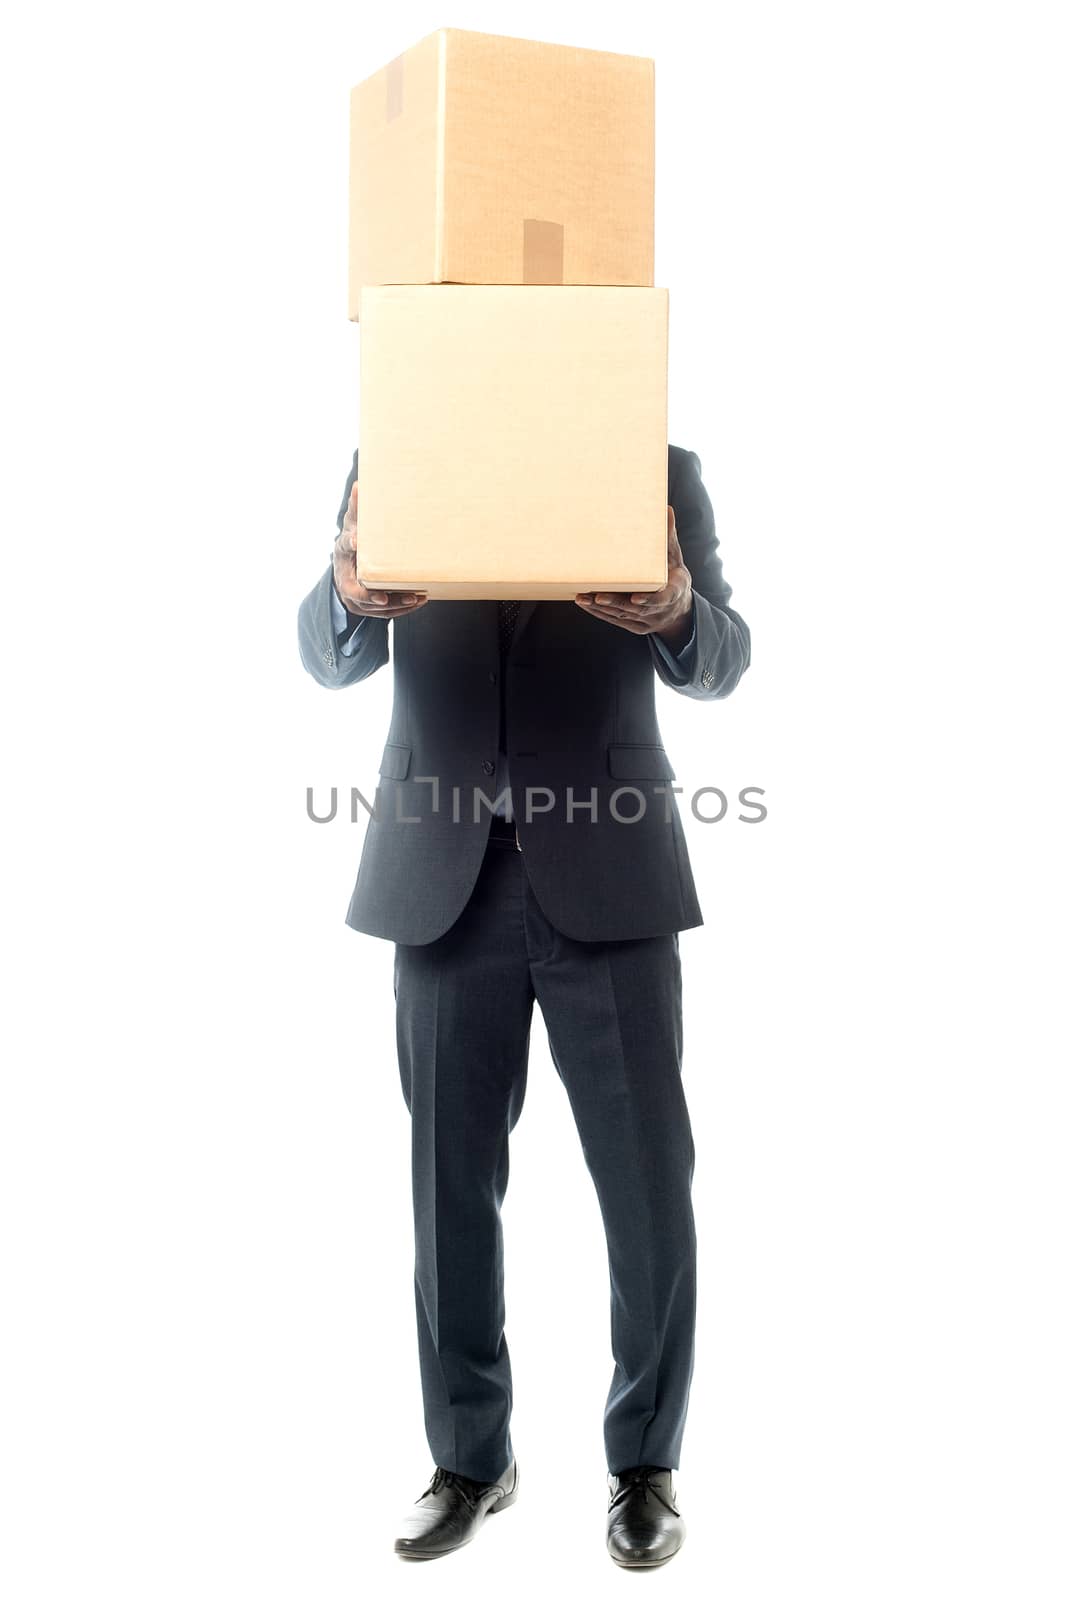 corporate man holding stack of boxes